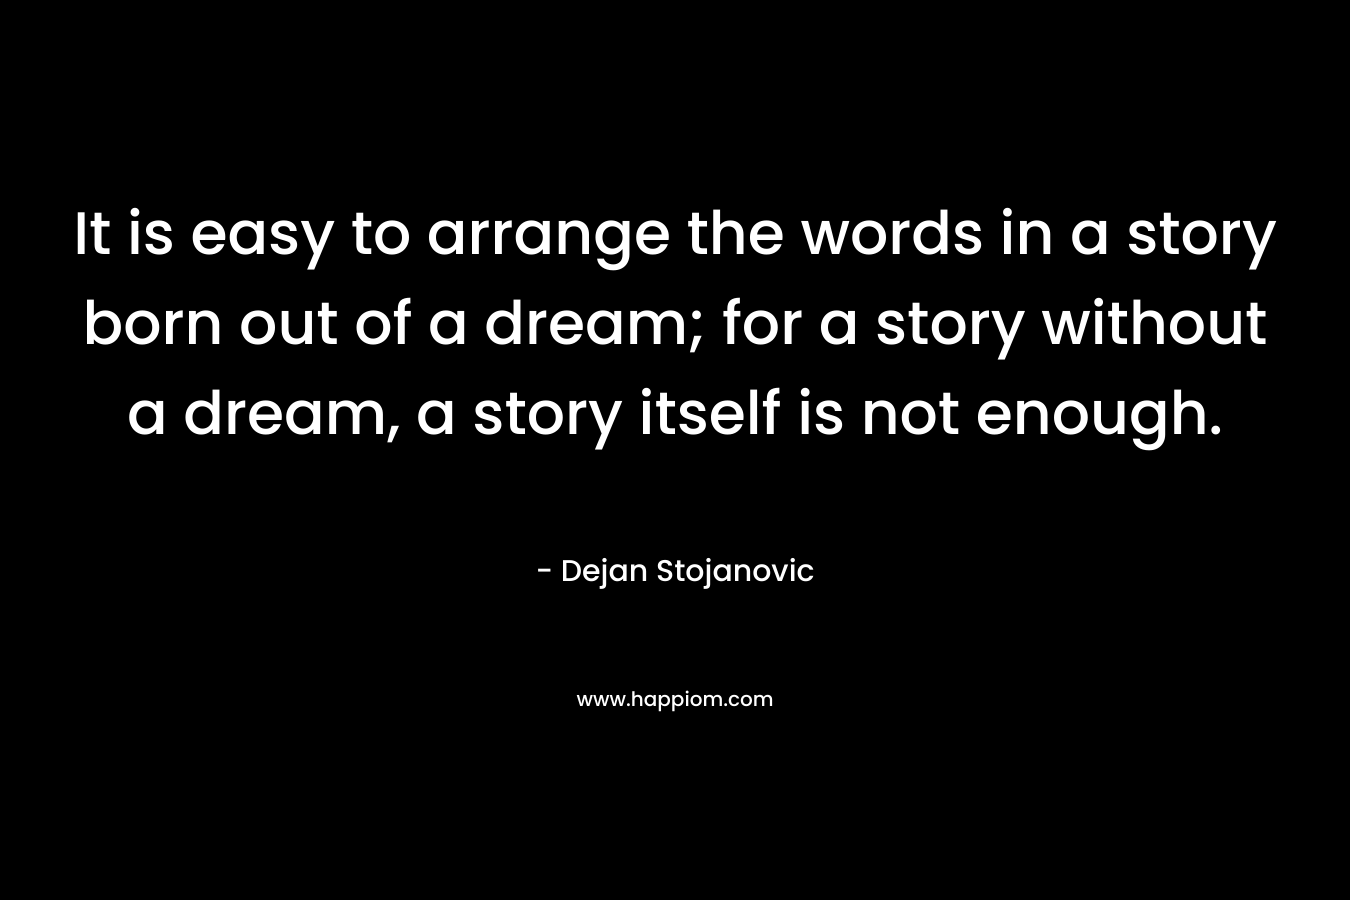 It is easy to arrange the words in a story born out of a dream; for a story without a dream, a story itself is not enough.